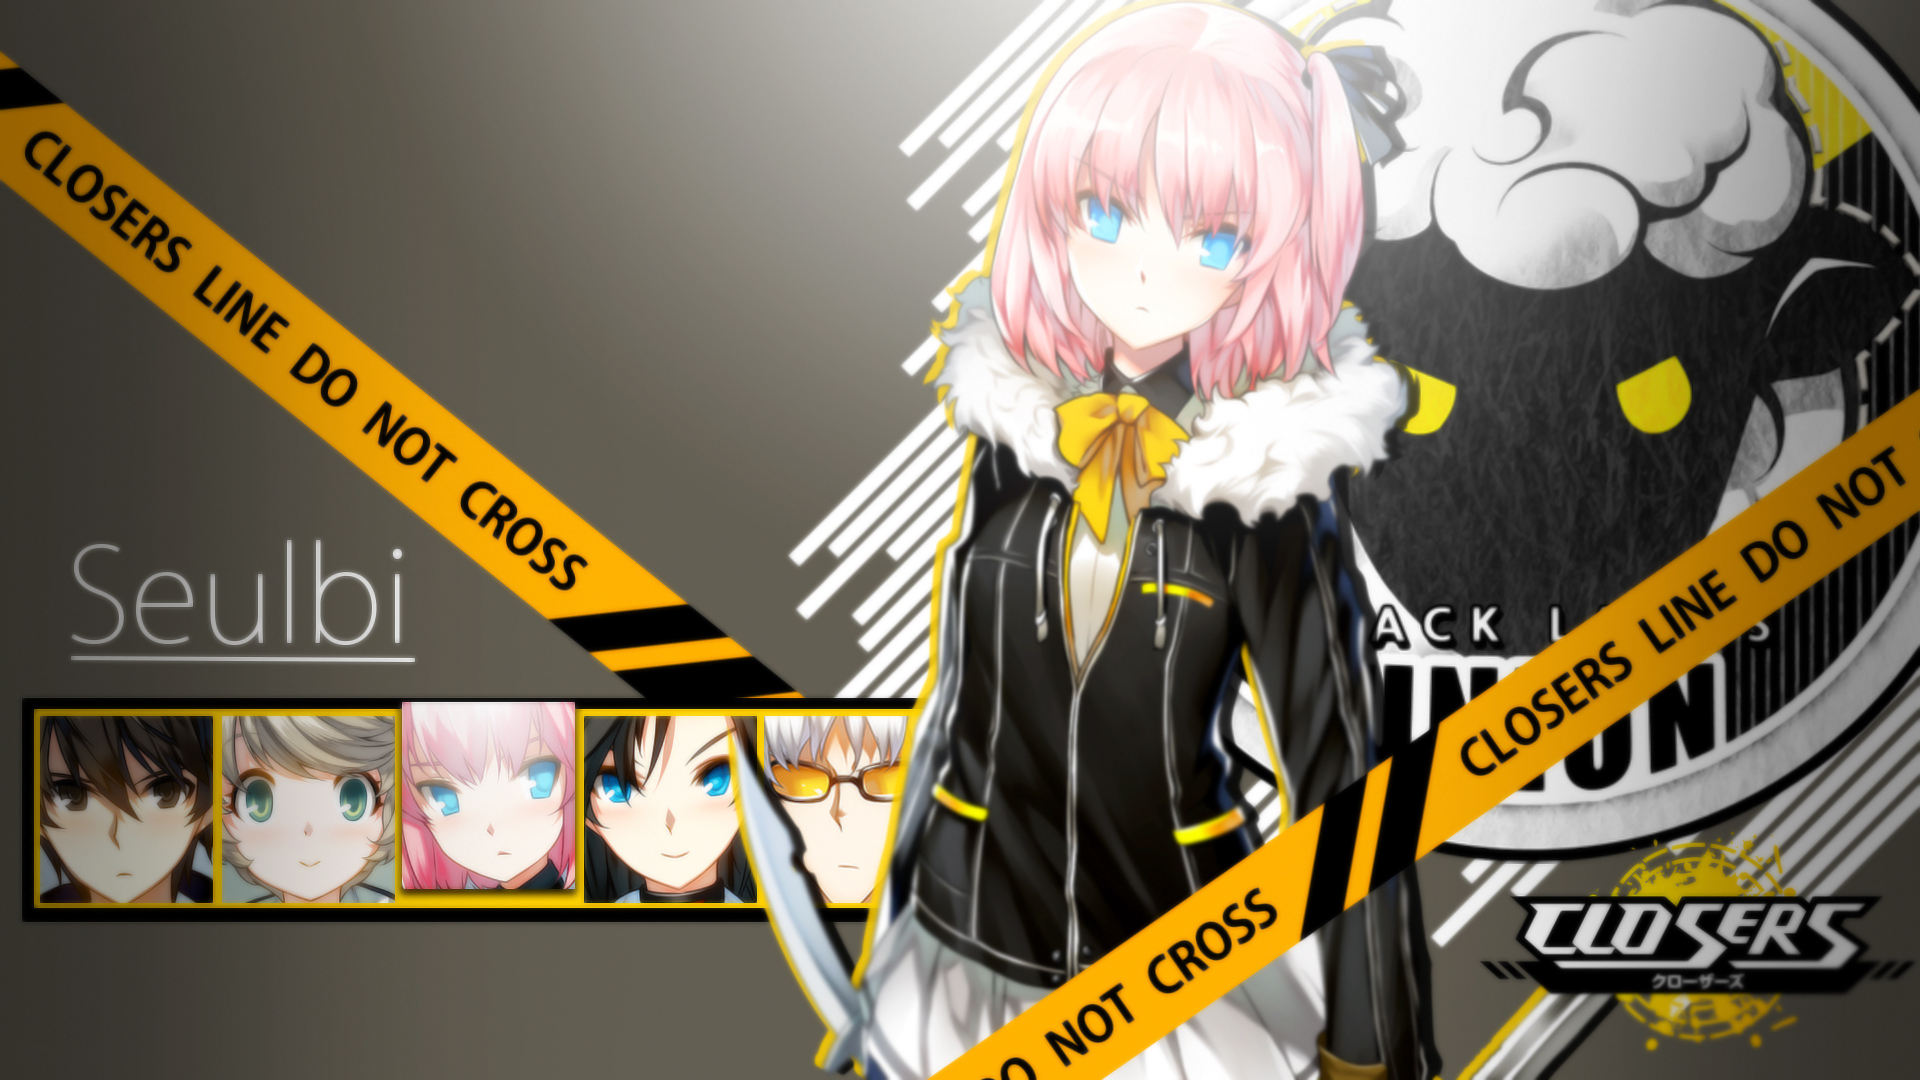 Video Game Closers HD Wallpaper by Volderyck